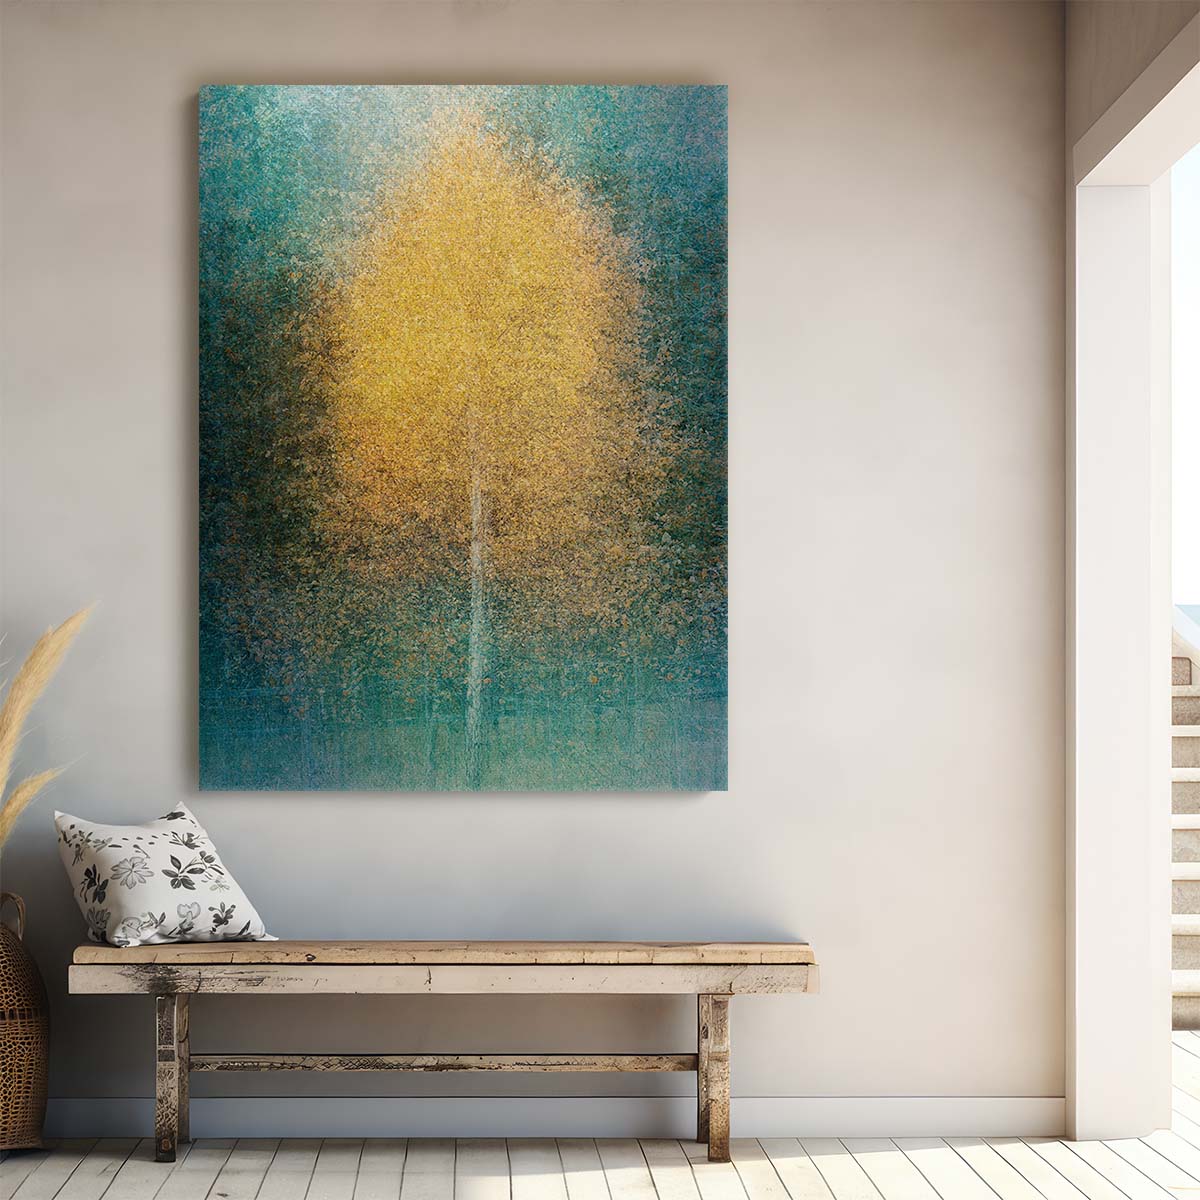 Autumn Forest Landscape Photography - Lonely Yellow Tree in Sweden by Luxuriance Designs, made in USA